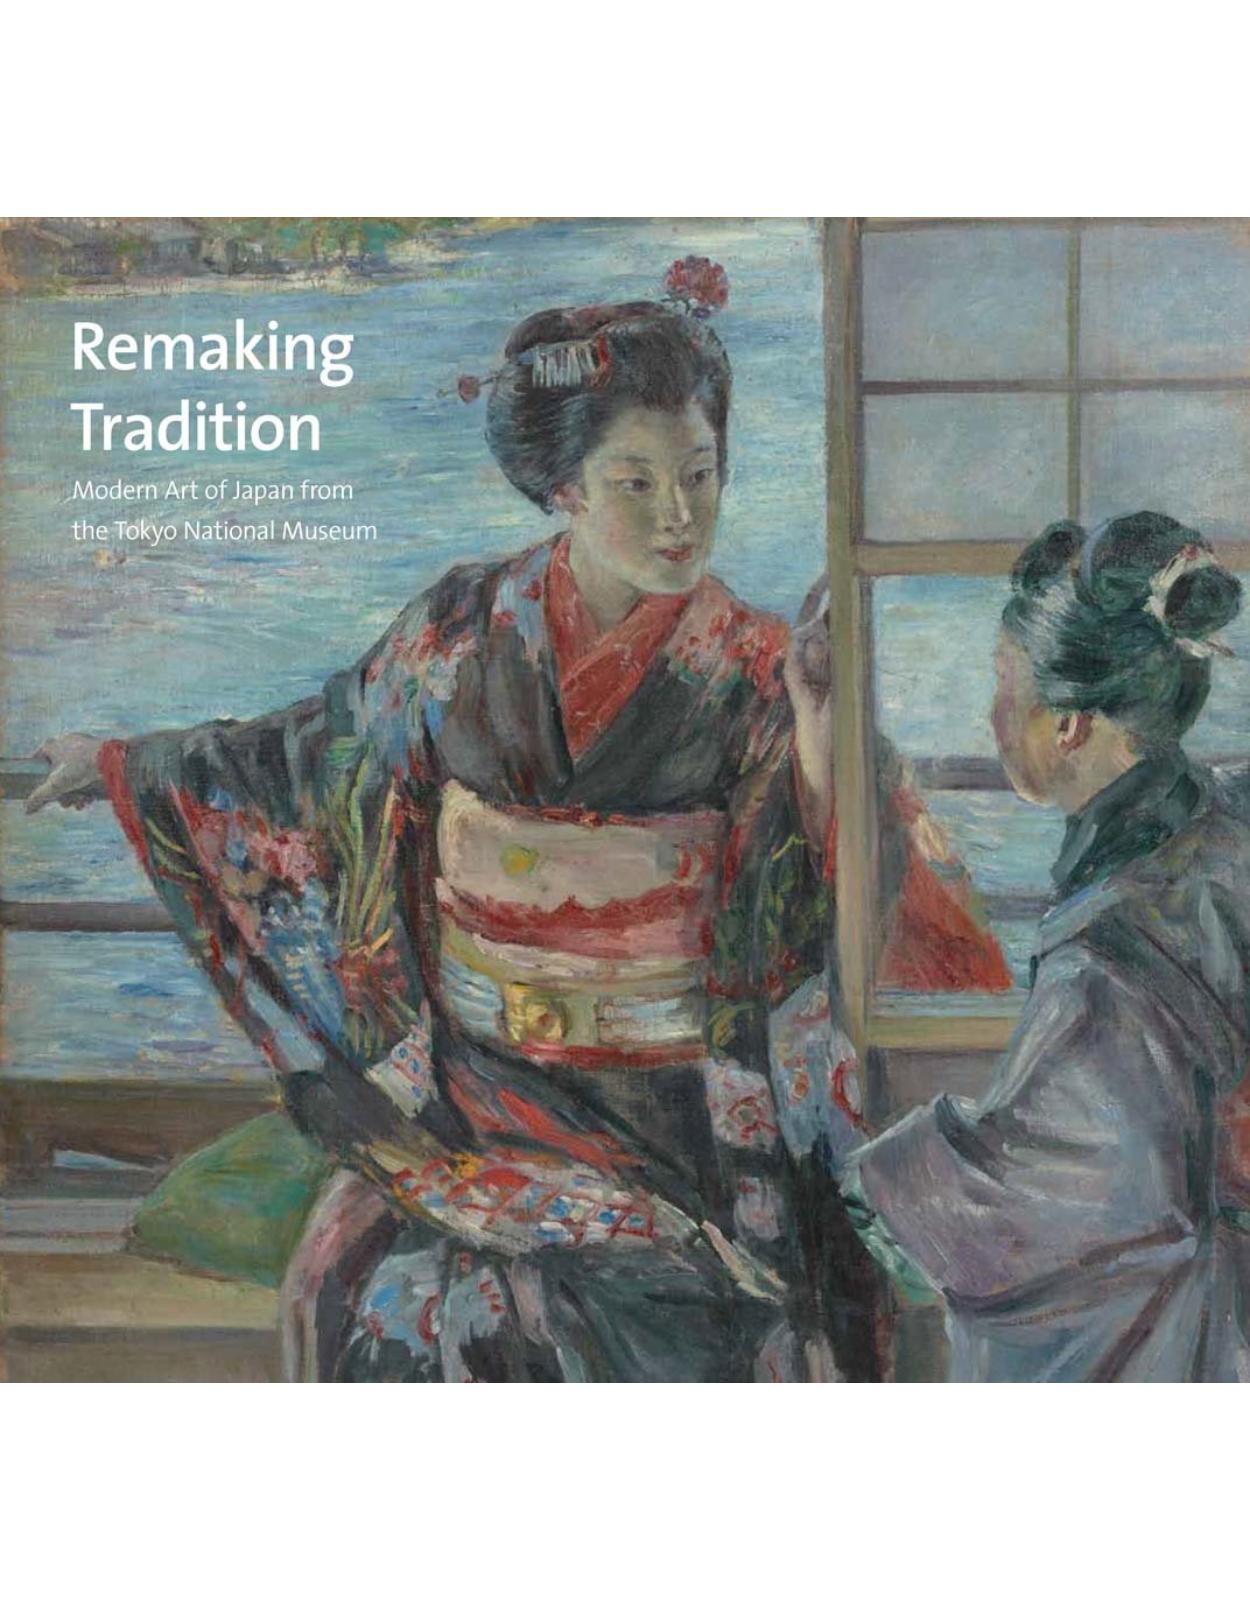 Remaking Tradition. Modern Art of Japan from the Tokyo National Museum